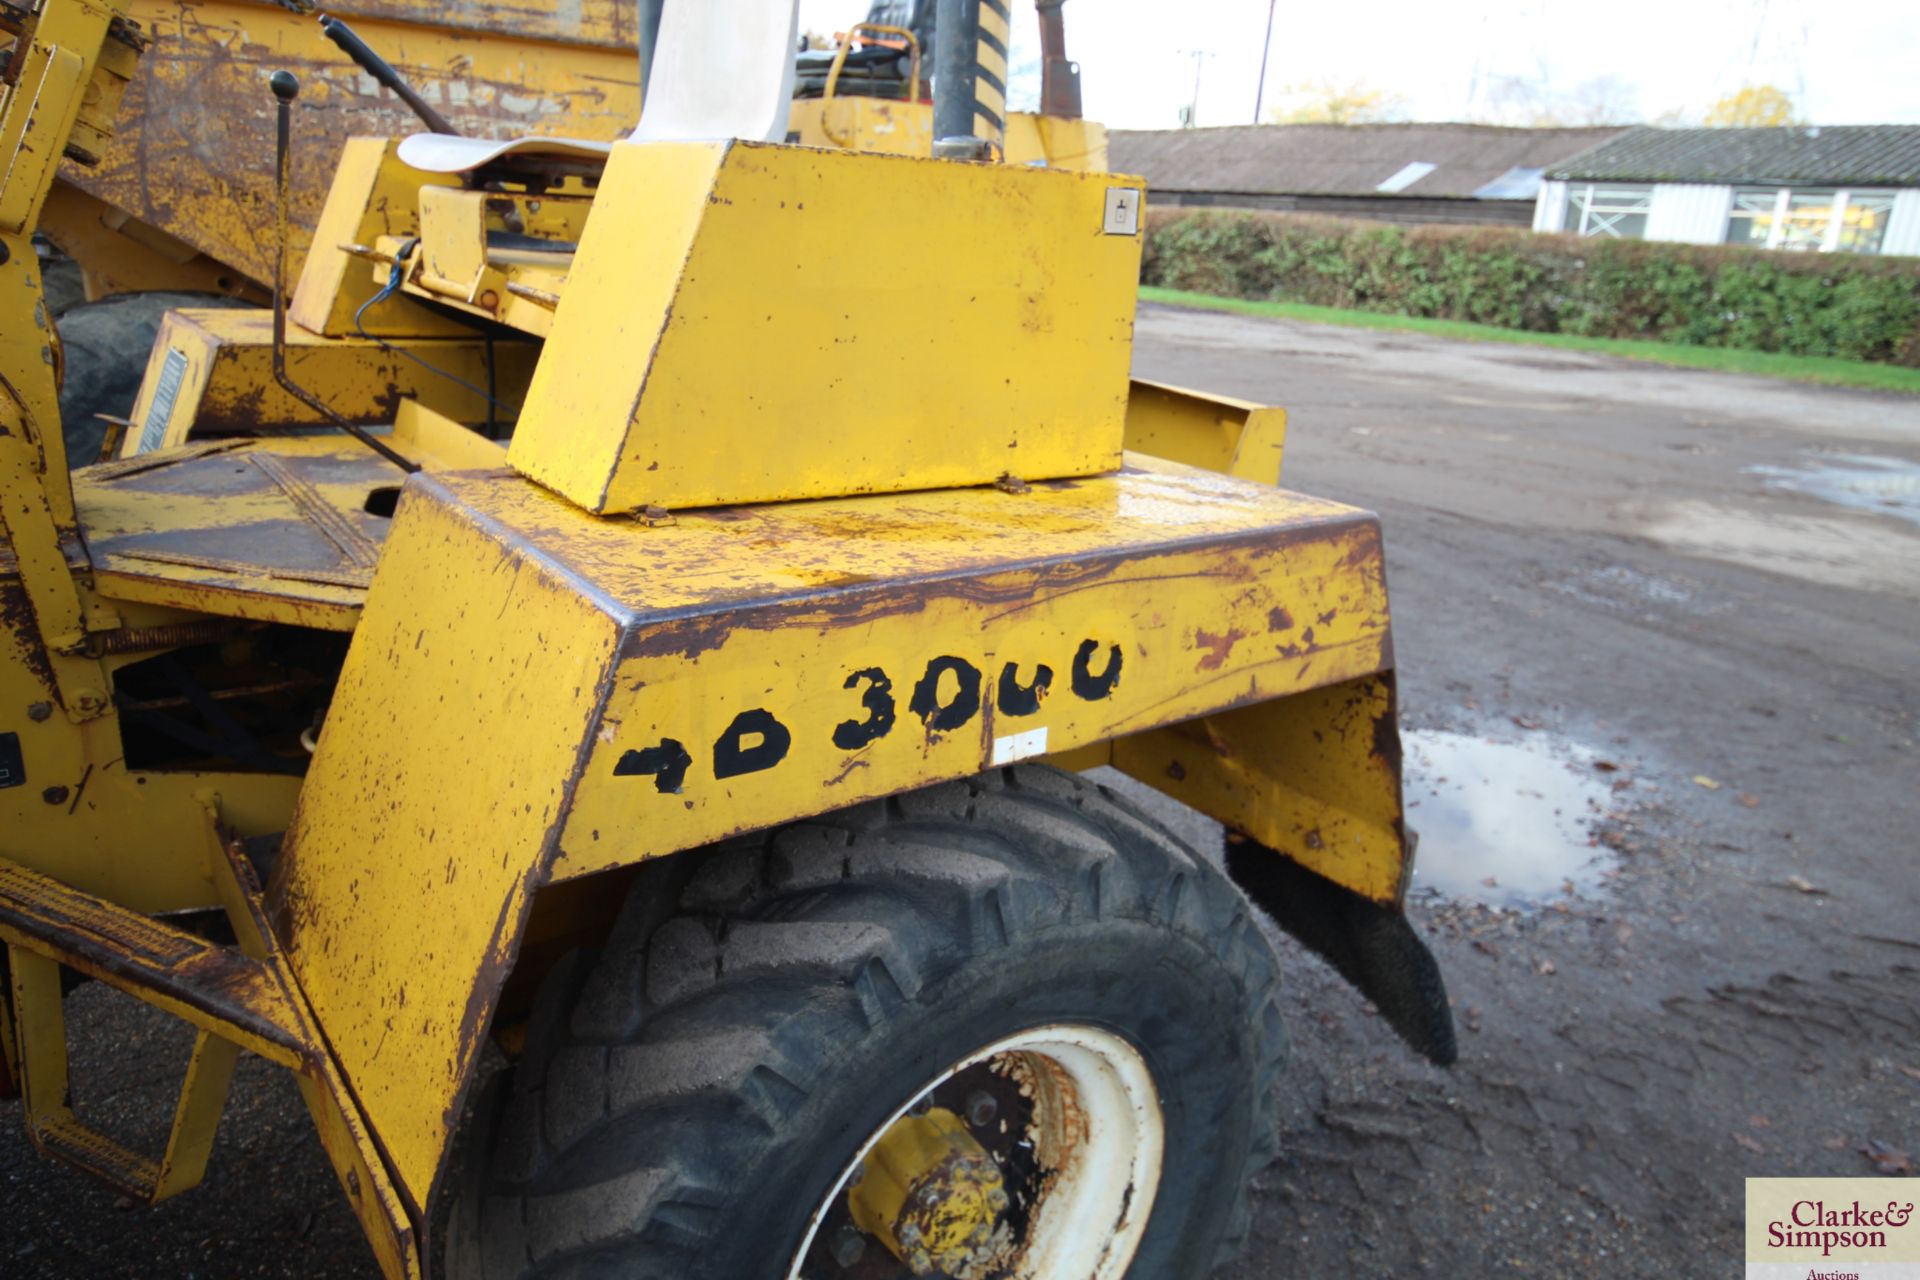 Sanderson Winget 4B 3000 4WD dumper. Serial number L4B34900715. 12.6-18 wheels and tyres. With - Image 11 of 26